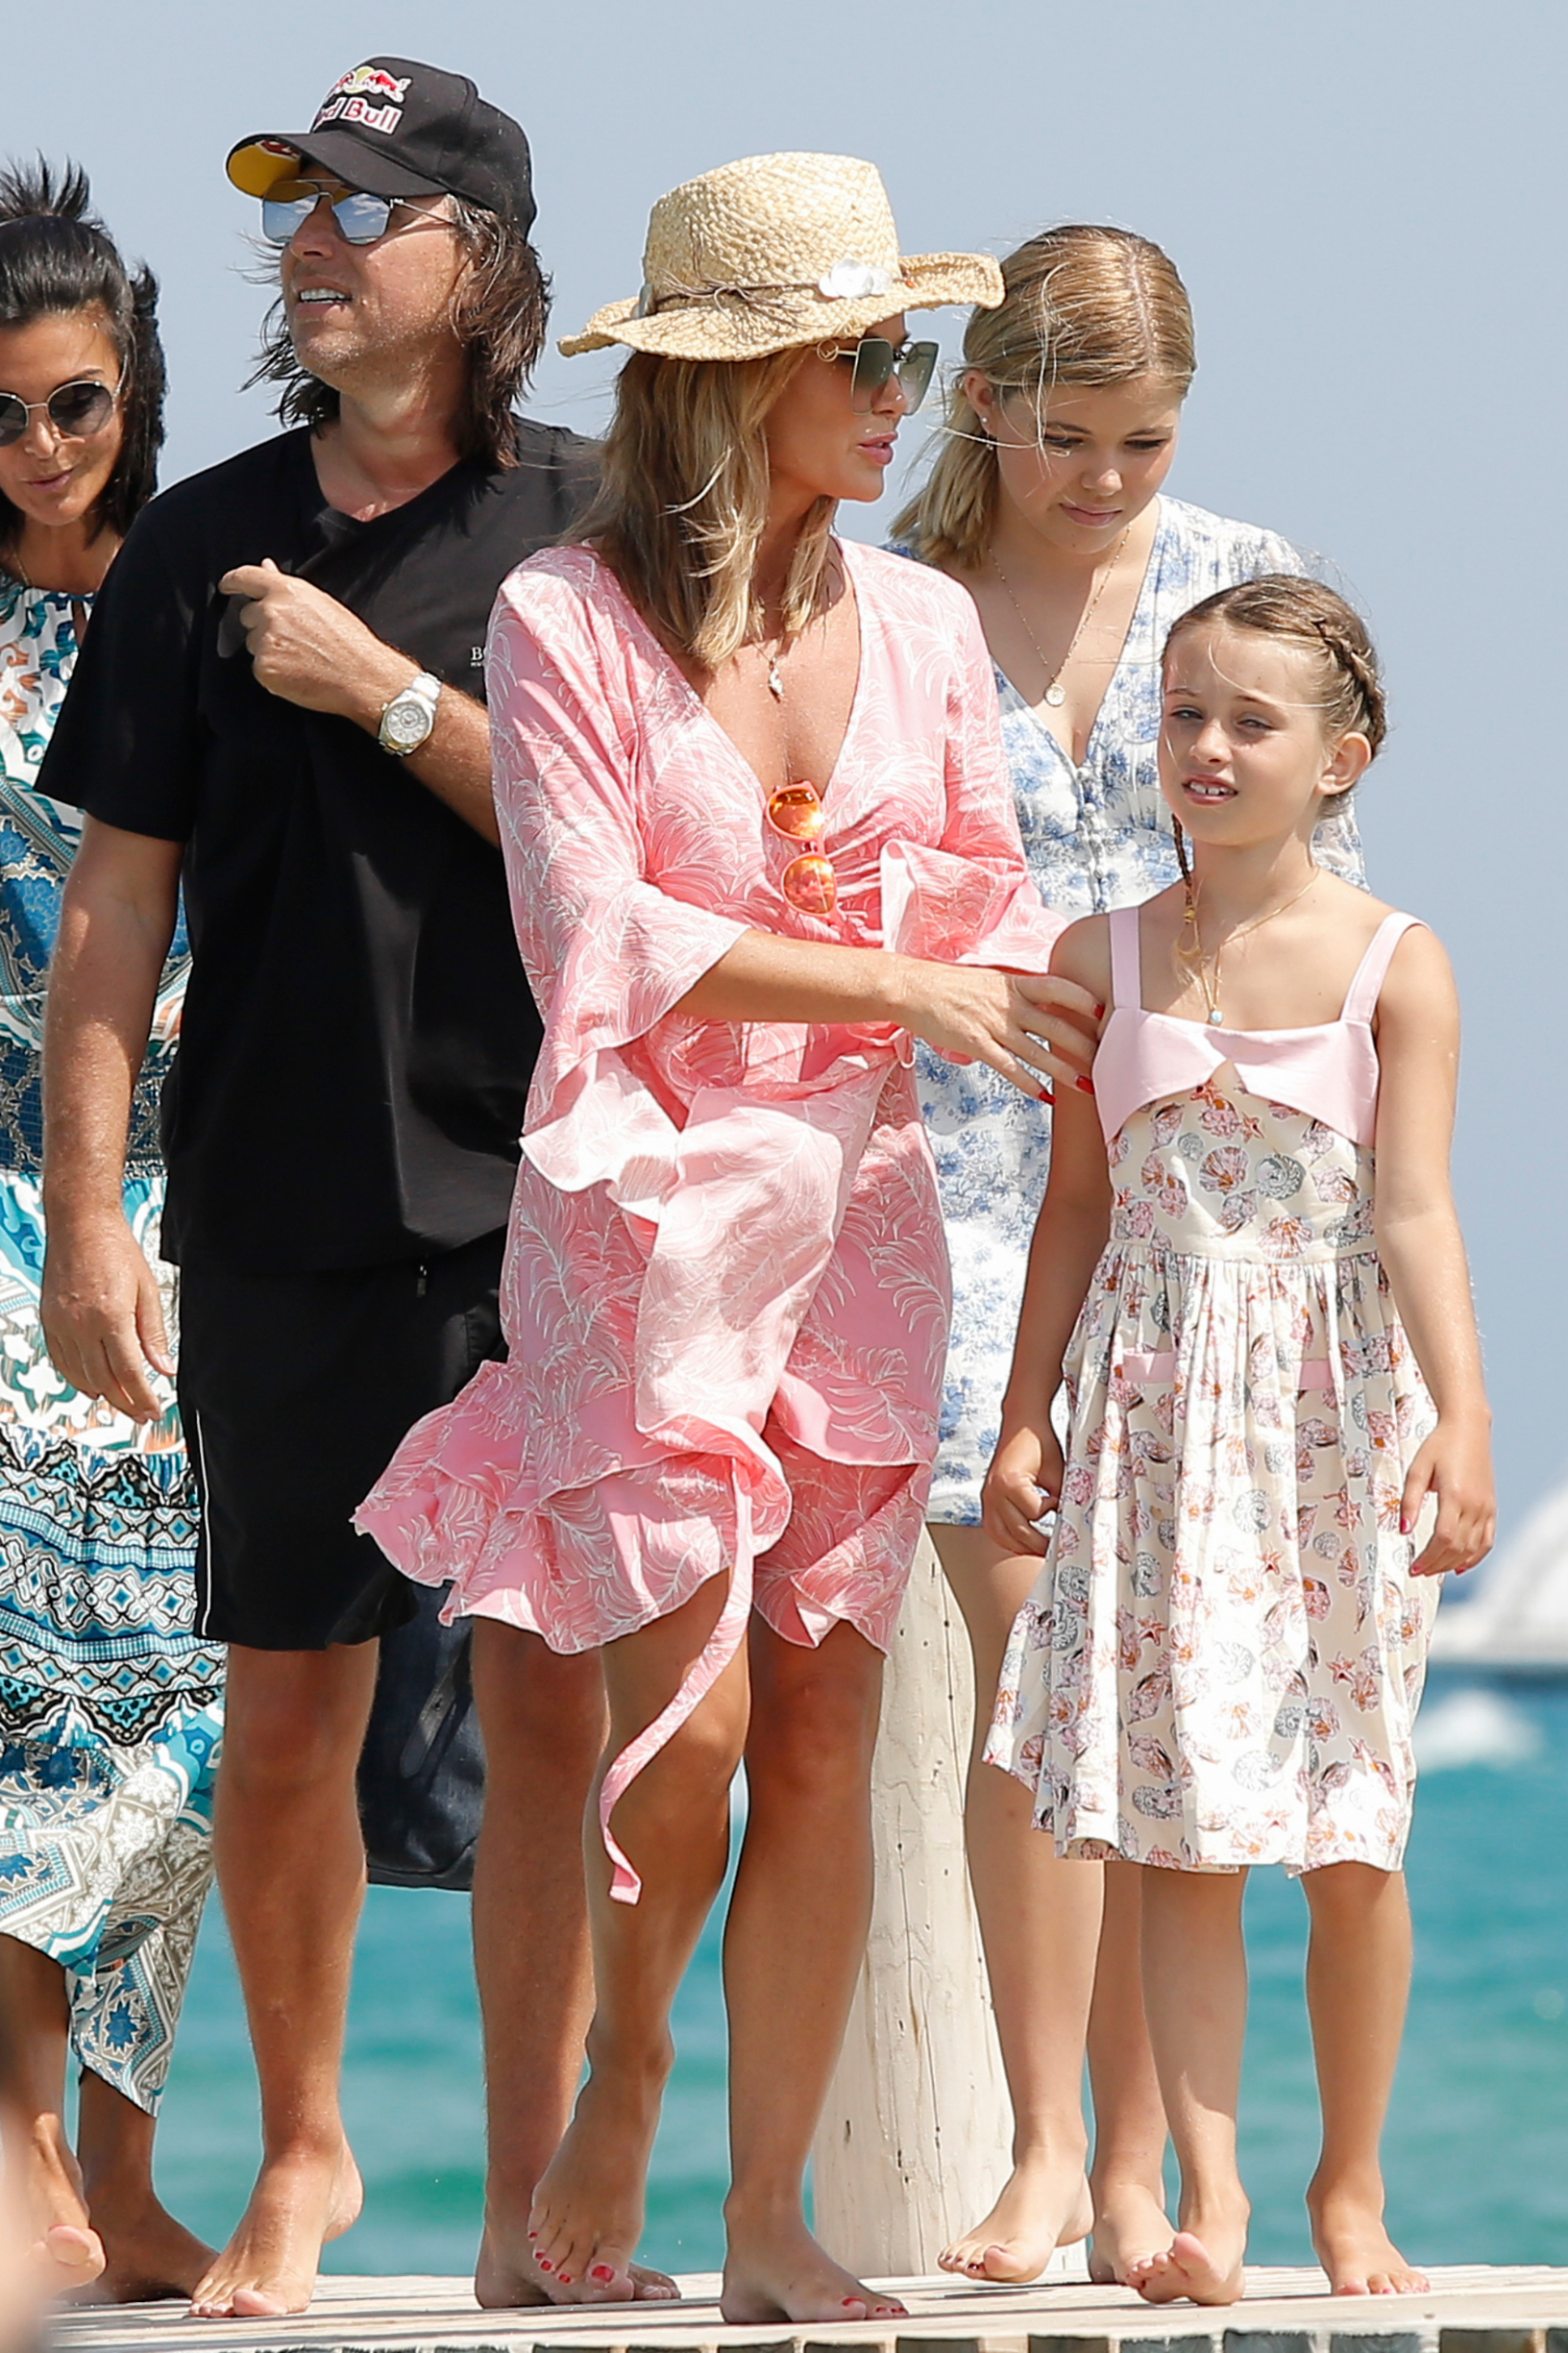 July 23rd, 2020 - Saint Tropez

Amanda Holden Chris Hughes arriving at Club 55

****** BYLINE MUST READ : © Spread Pictures ******

****** No Web Usage before agreement ******

******Please hide the children's faces prior to the publication******

****** Stricly No Mobile Phone Application or Apps use without our Prior Agreement ******

Enquiries at photo@spreadpictures.com,Image: 546608357, License: Rights-managed, Restrictions: WORLDWIDE, Model Release: no, Credit line: MCC / Spread Pictures / Profimedia